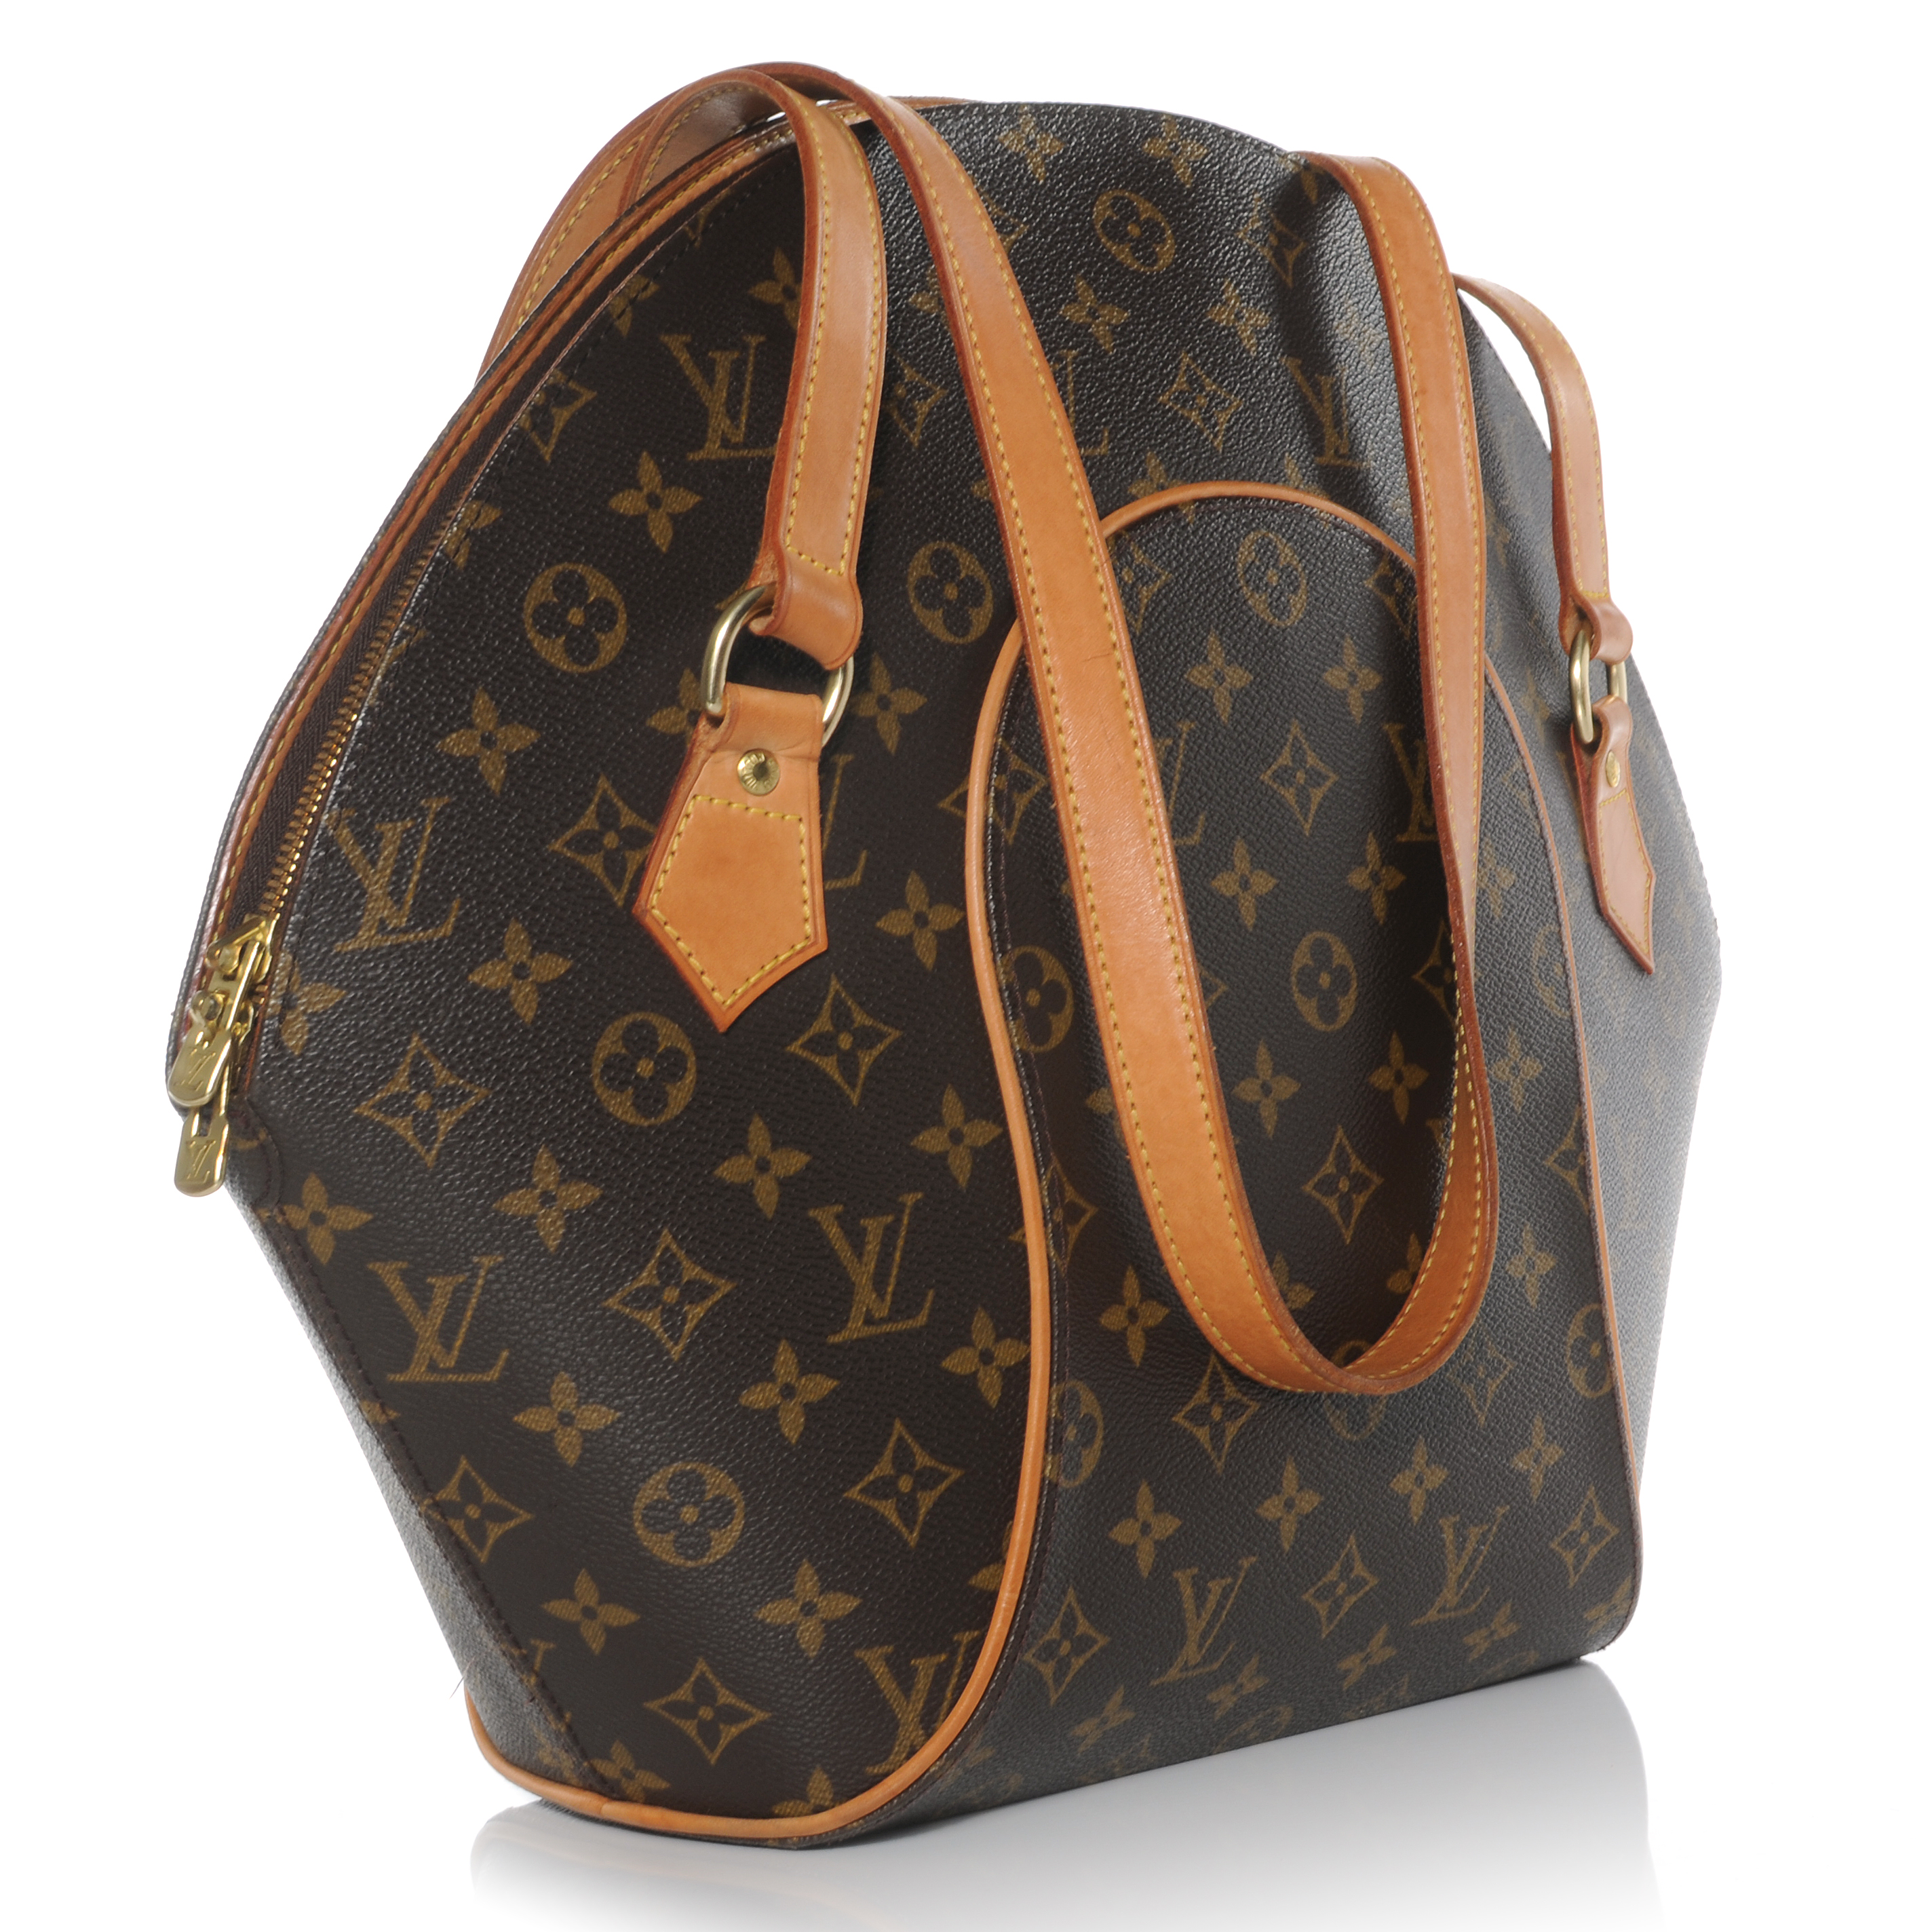 How To Display Louis Vuitton Bags | IQS Executive